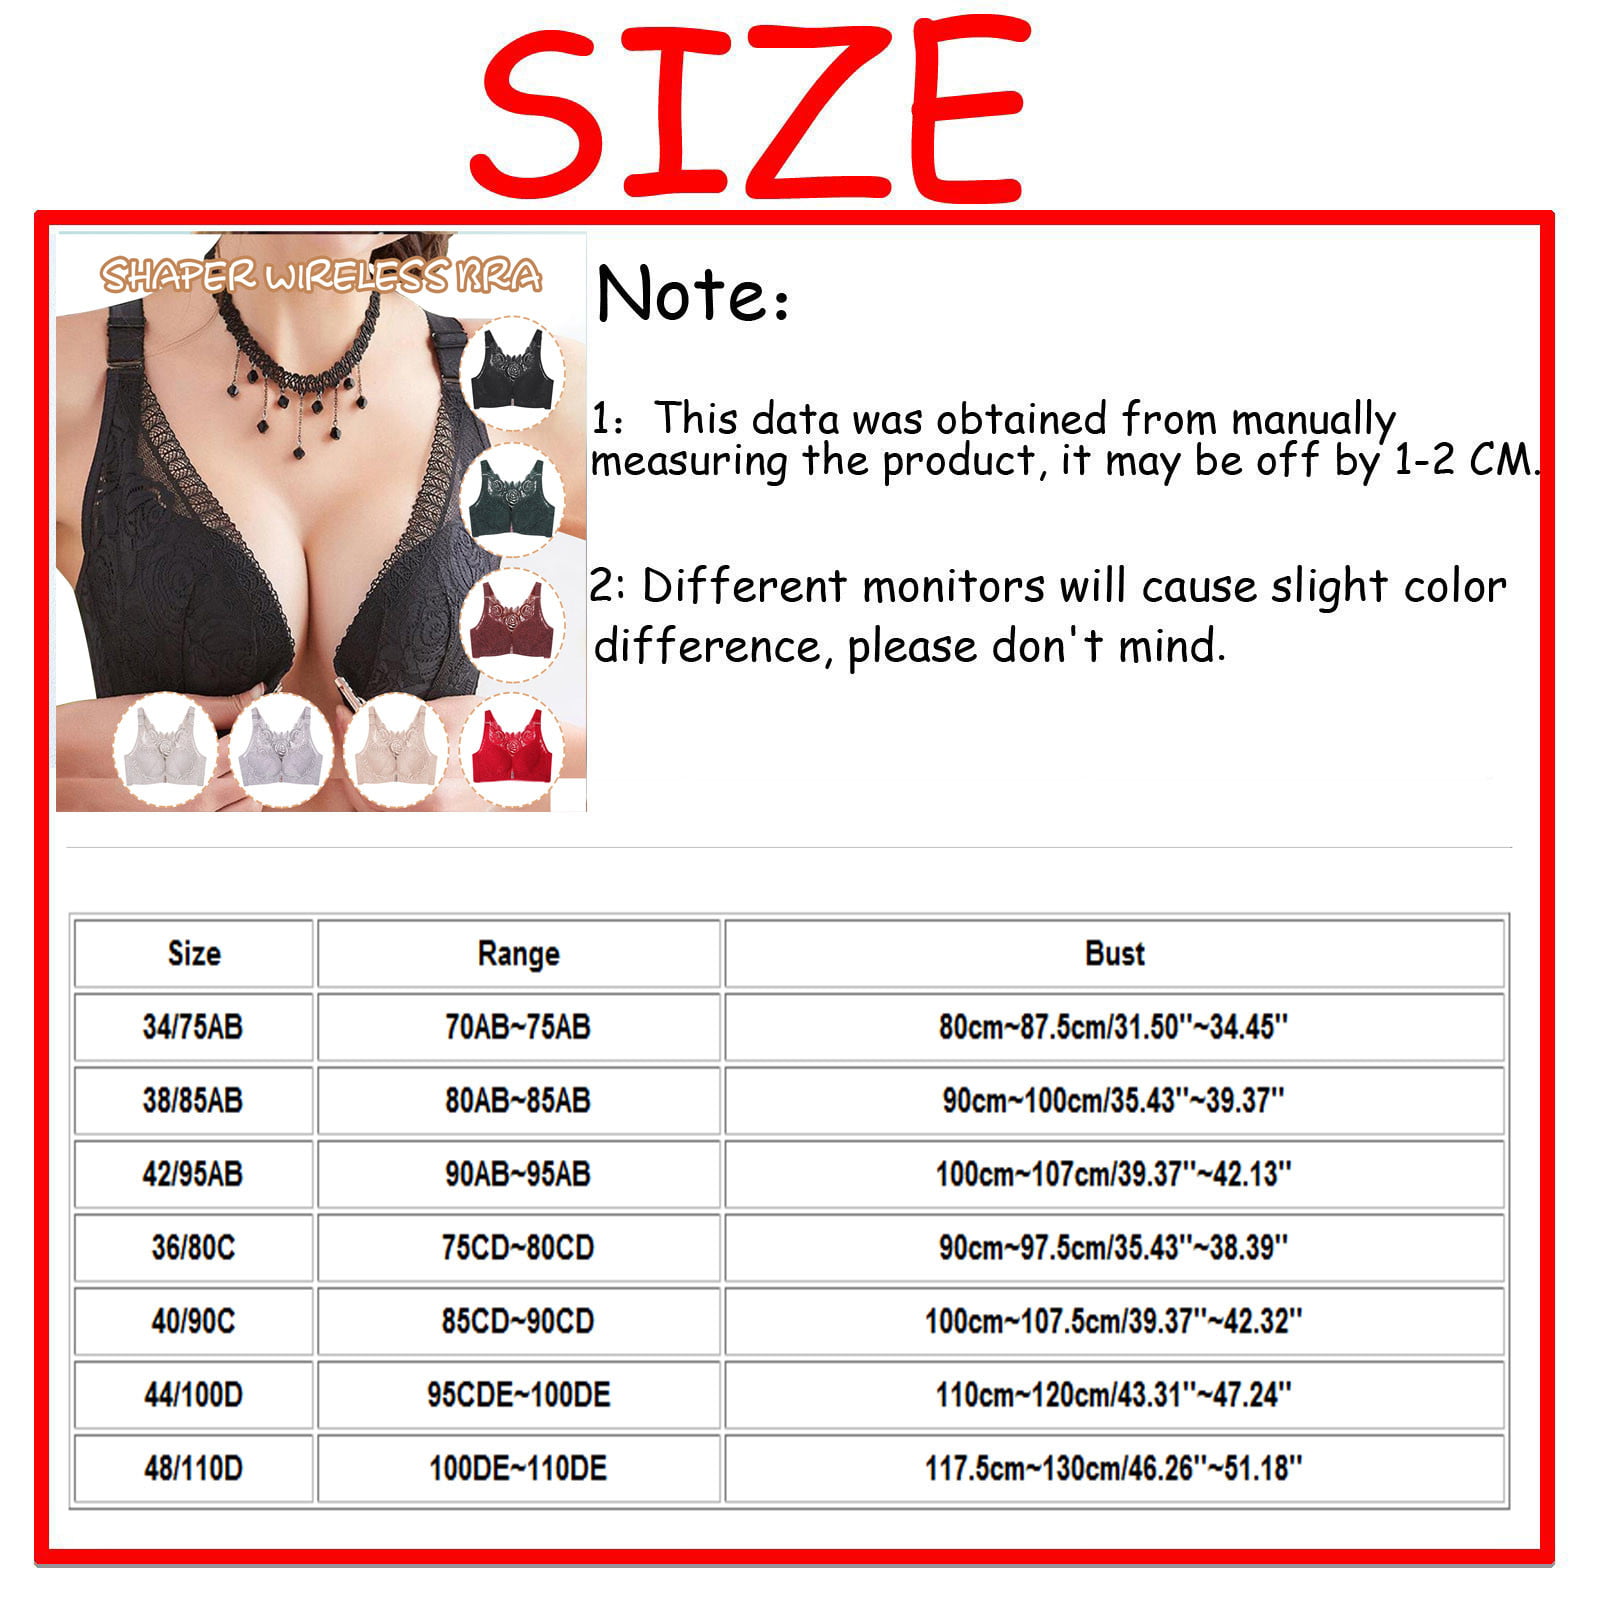 Aayomet Bras for Large Breasts Underwear Women's Big Chest Shows Small No  Steel Ring Droop Large Size Beauty Back (Blue, XXXXXL)